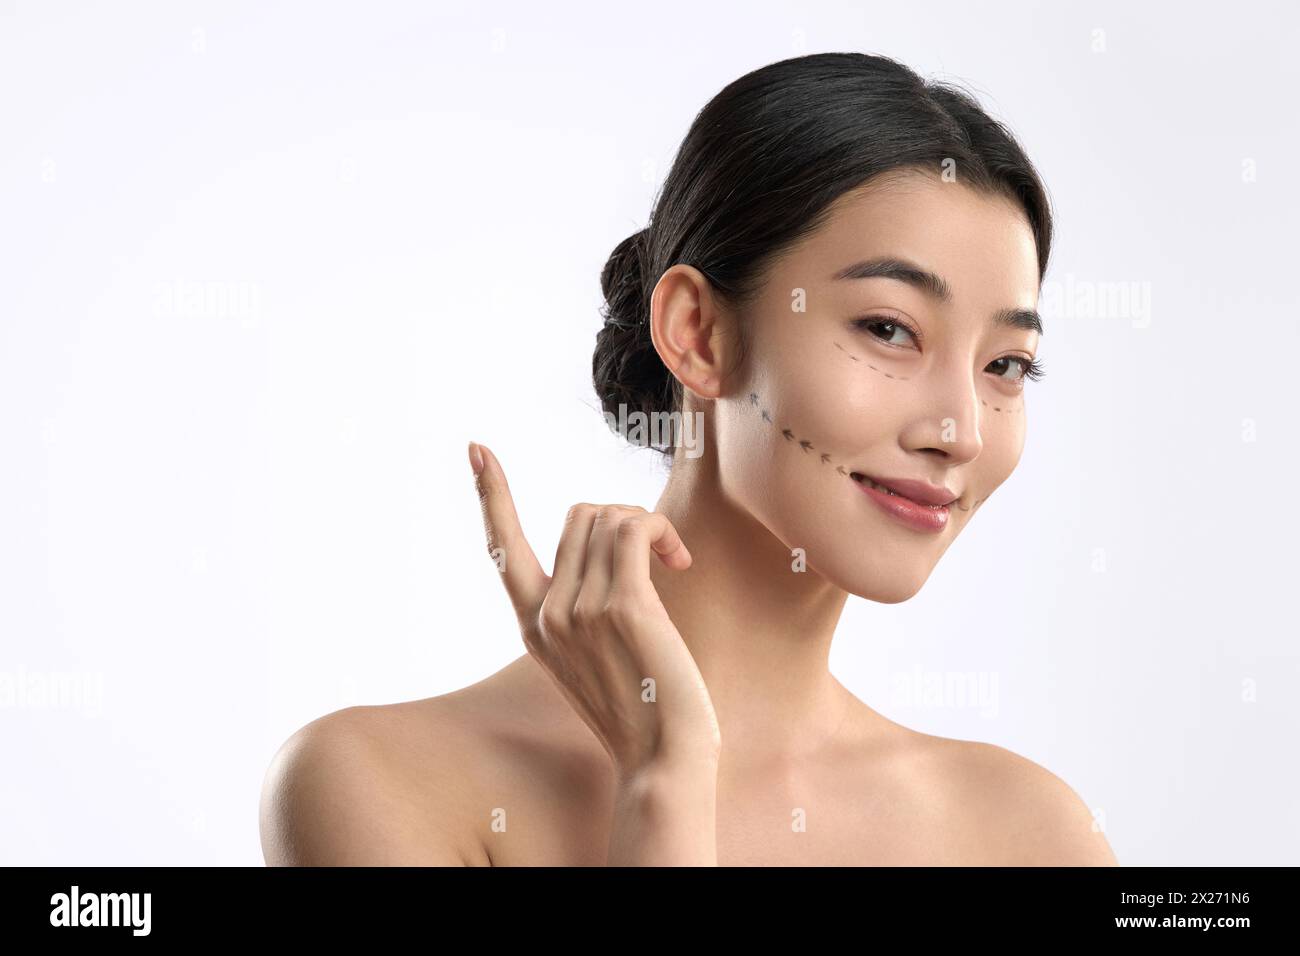 Young women undergoing facial contouring and cosmetic surgery Stock Photo